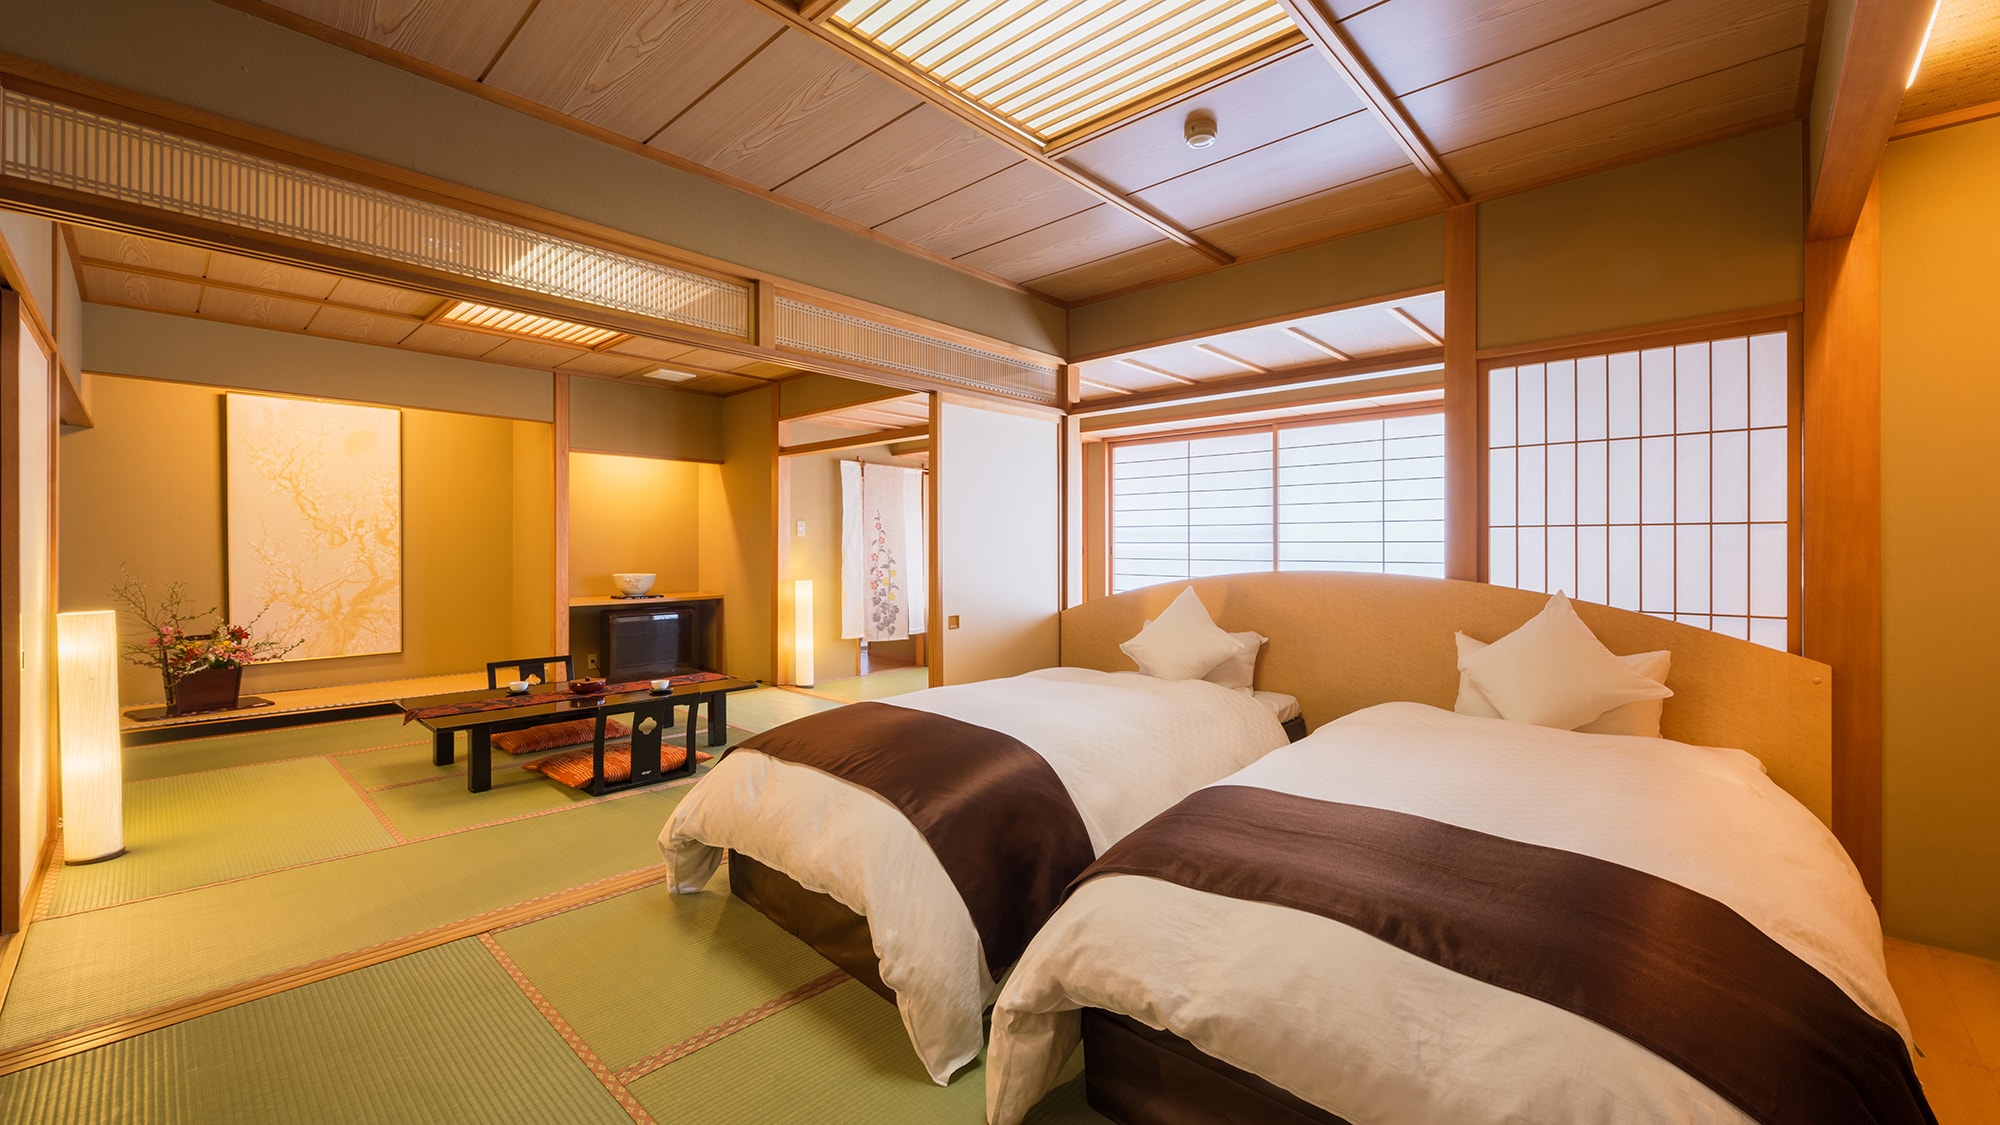 ■ Deluxe Japanese-style room A ■ Two spacious rooms (14 tatami mats).